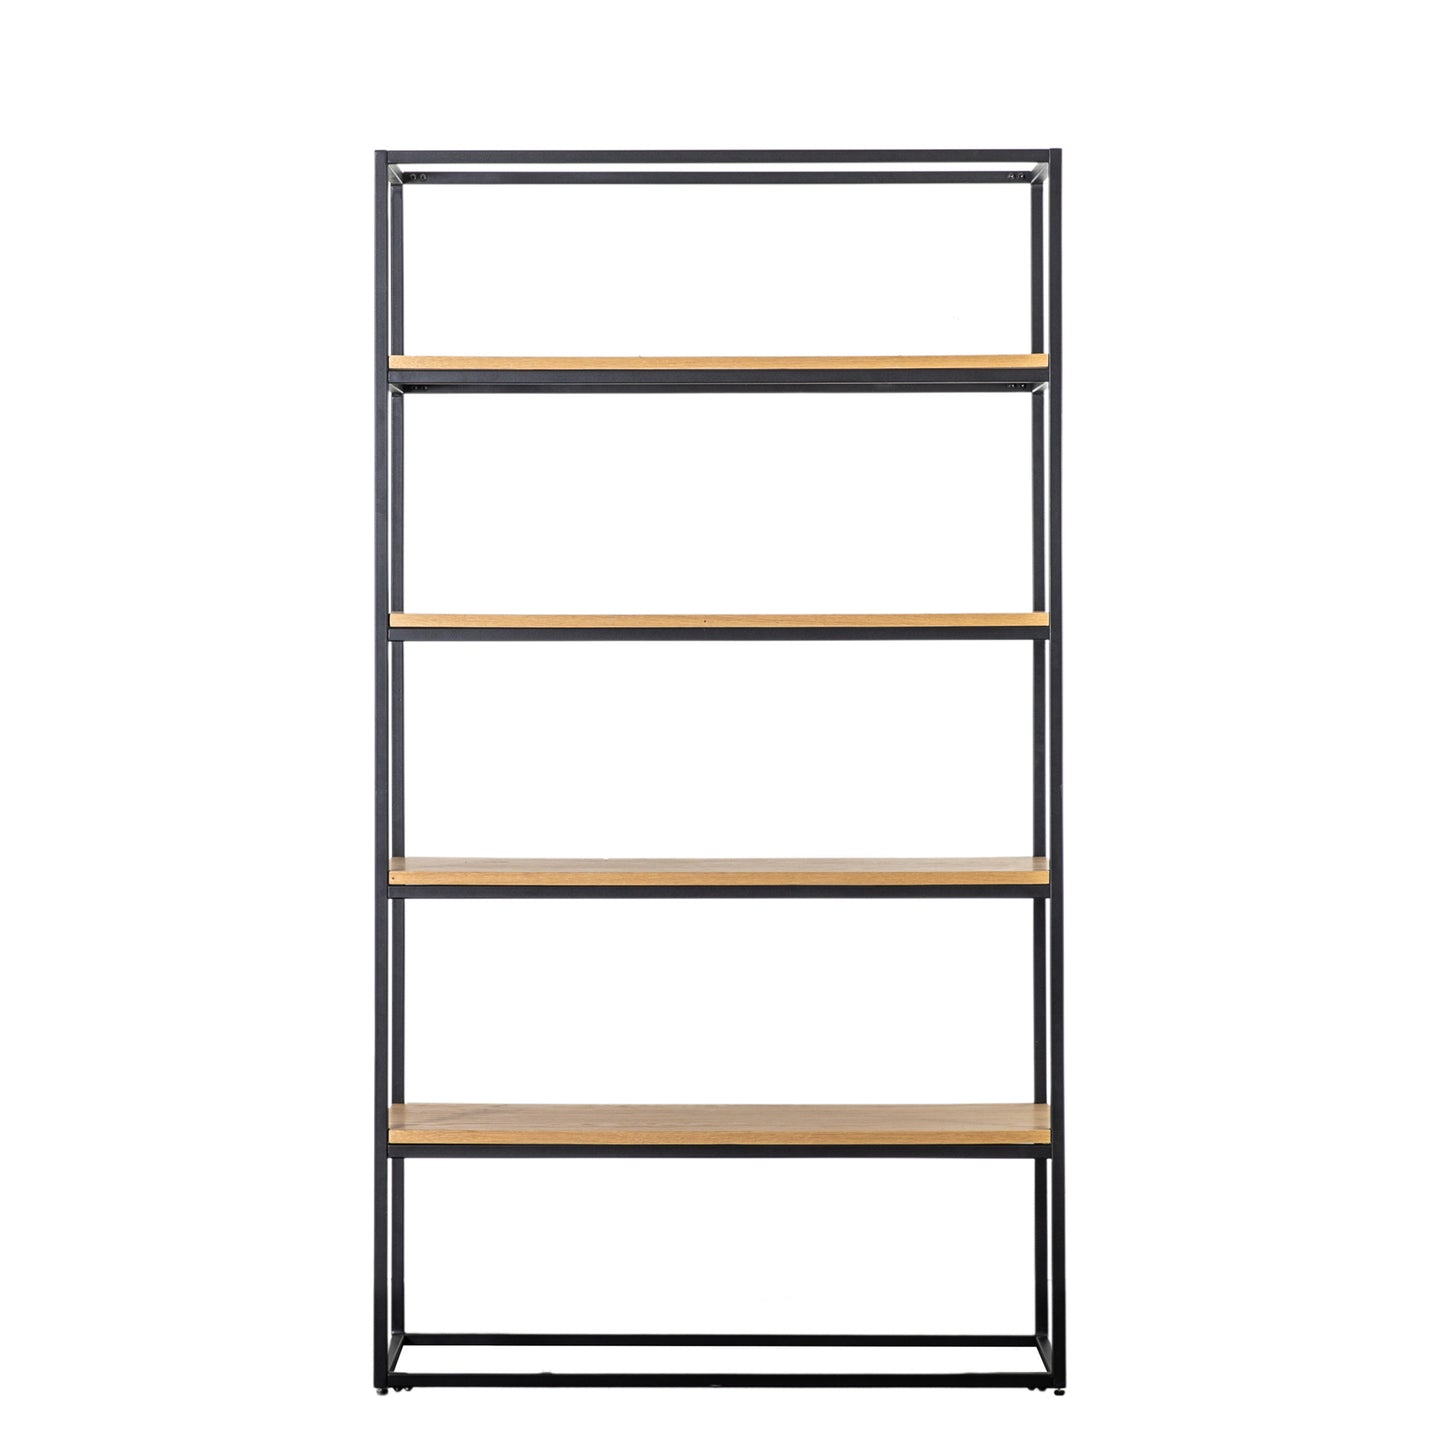 A Staverton Display Unit 1000x380x1800mm with wooden shelves perfect for home furniture and interior decor.